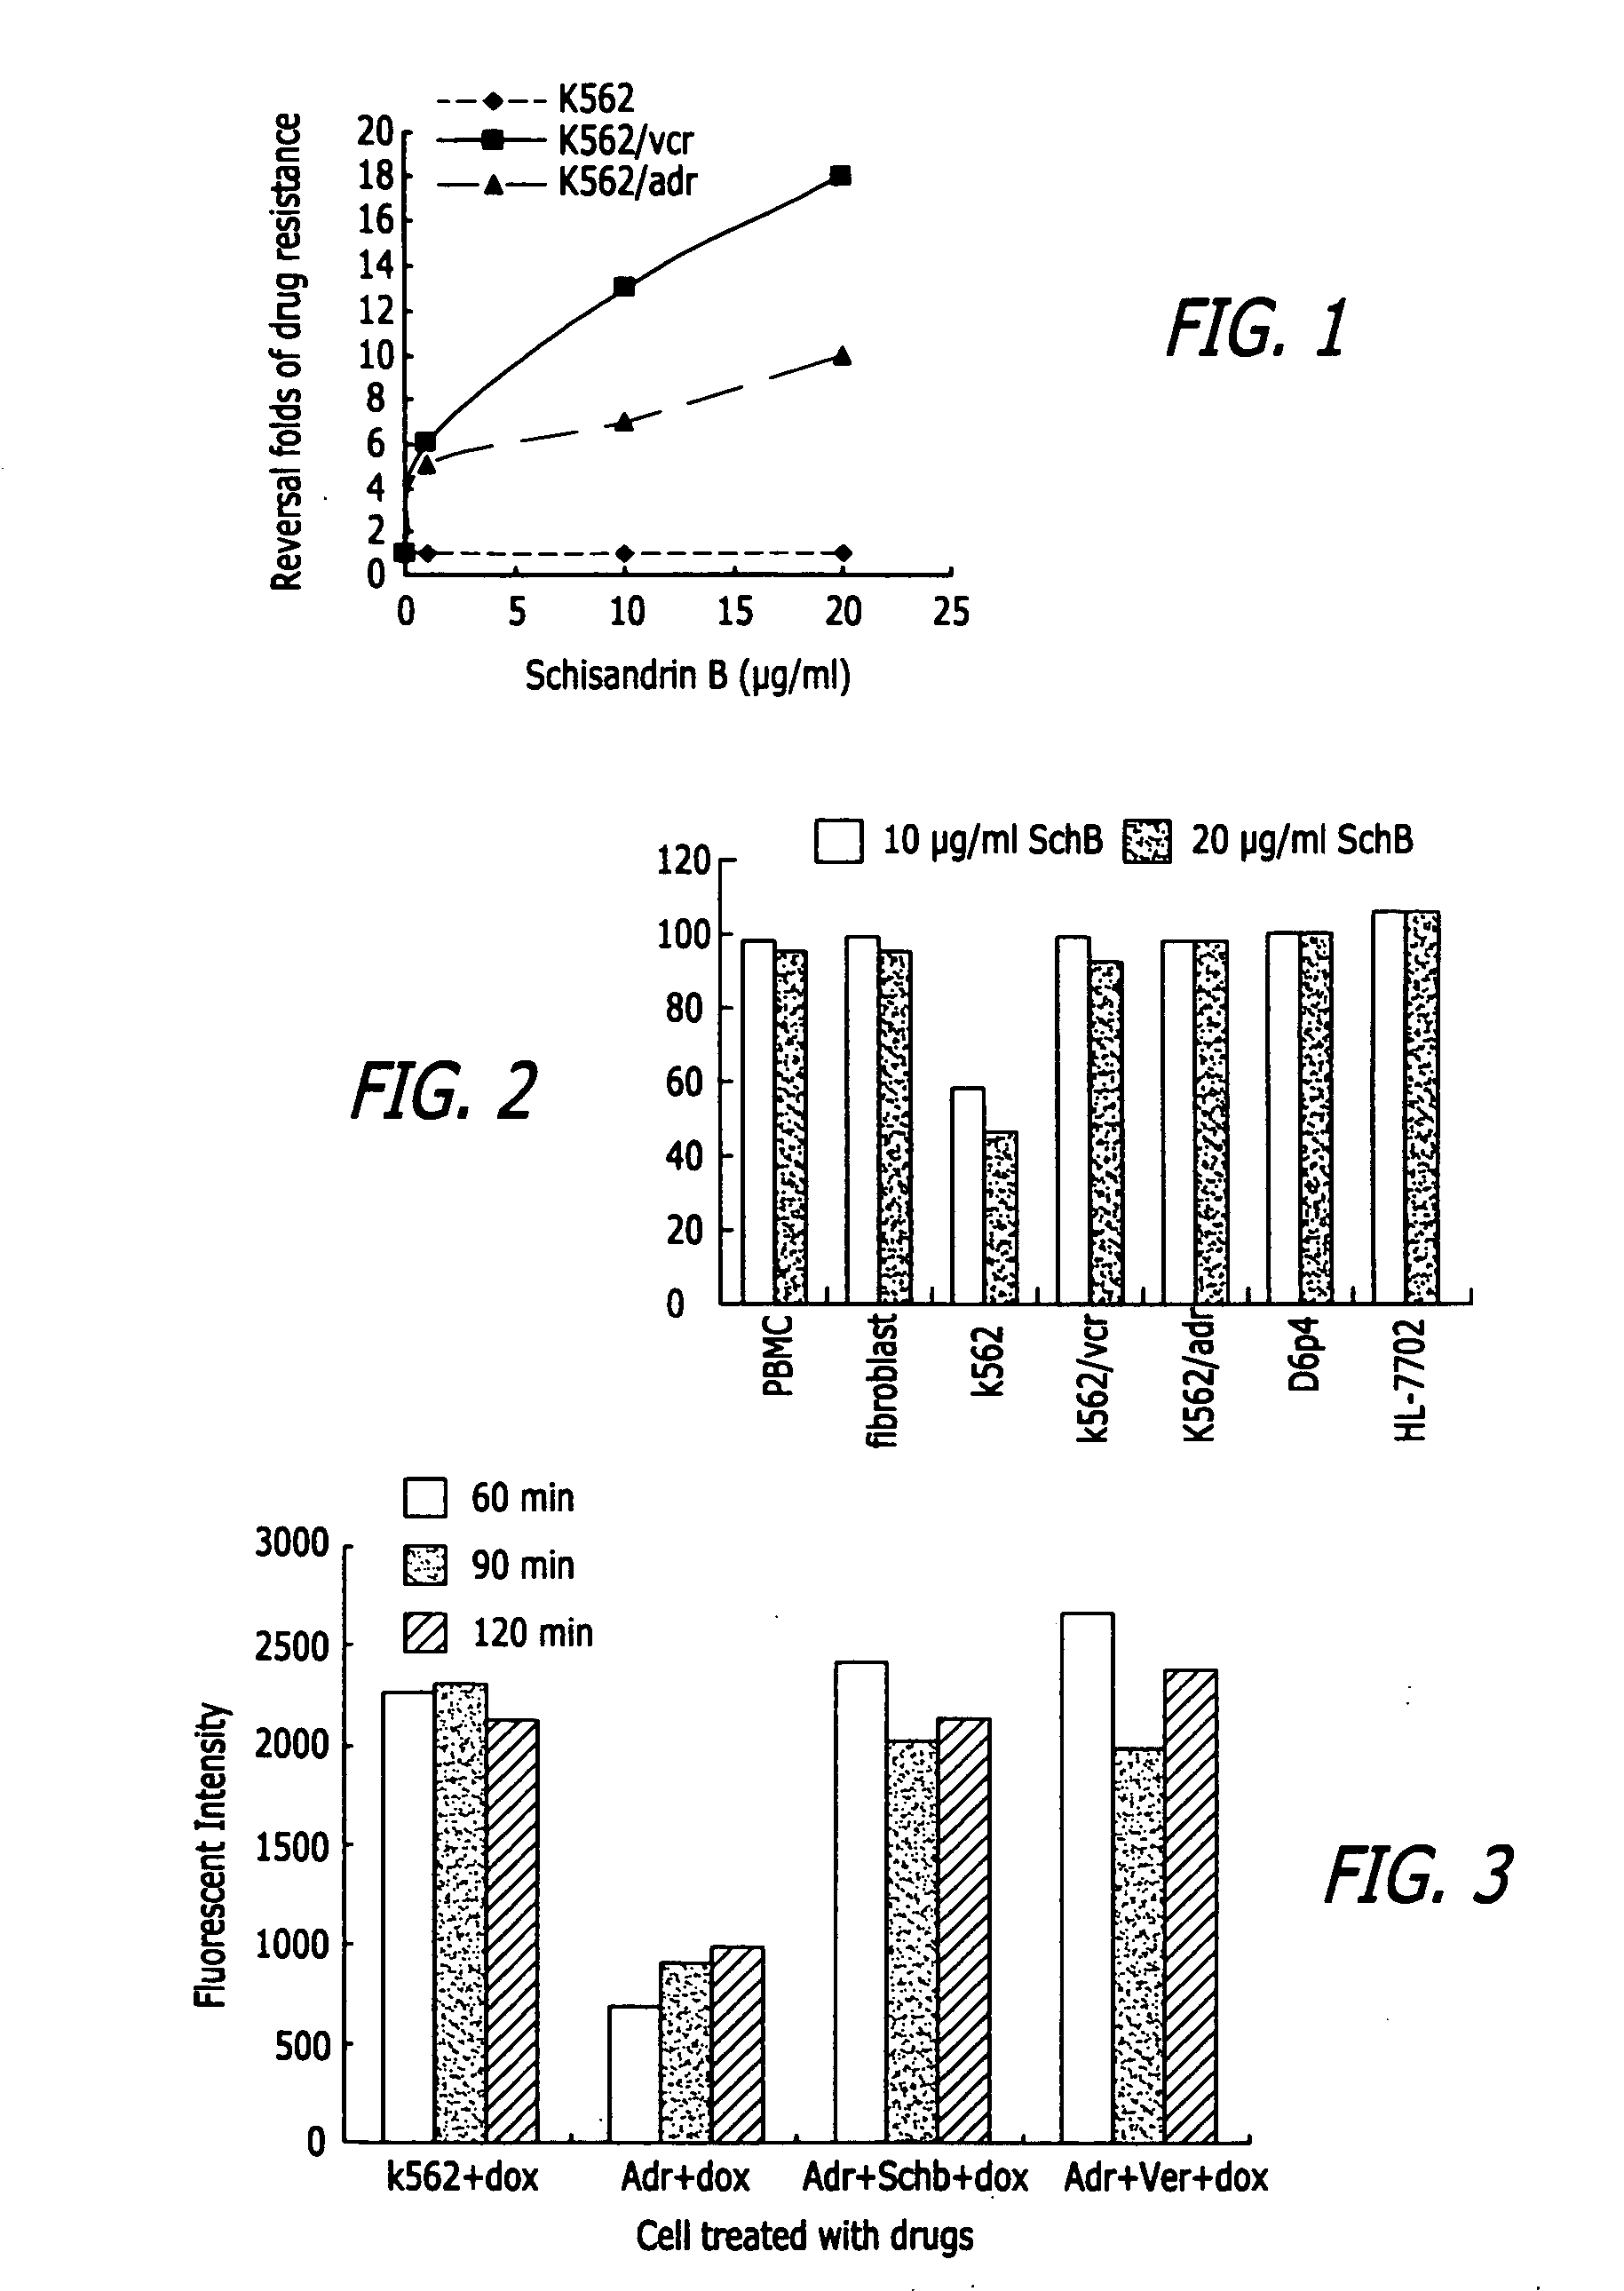 Methods of application of Schisandrin B in the preparation of anticancer medications